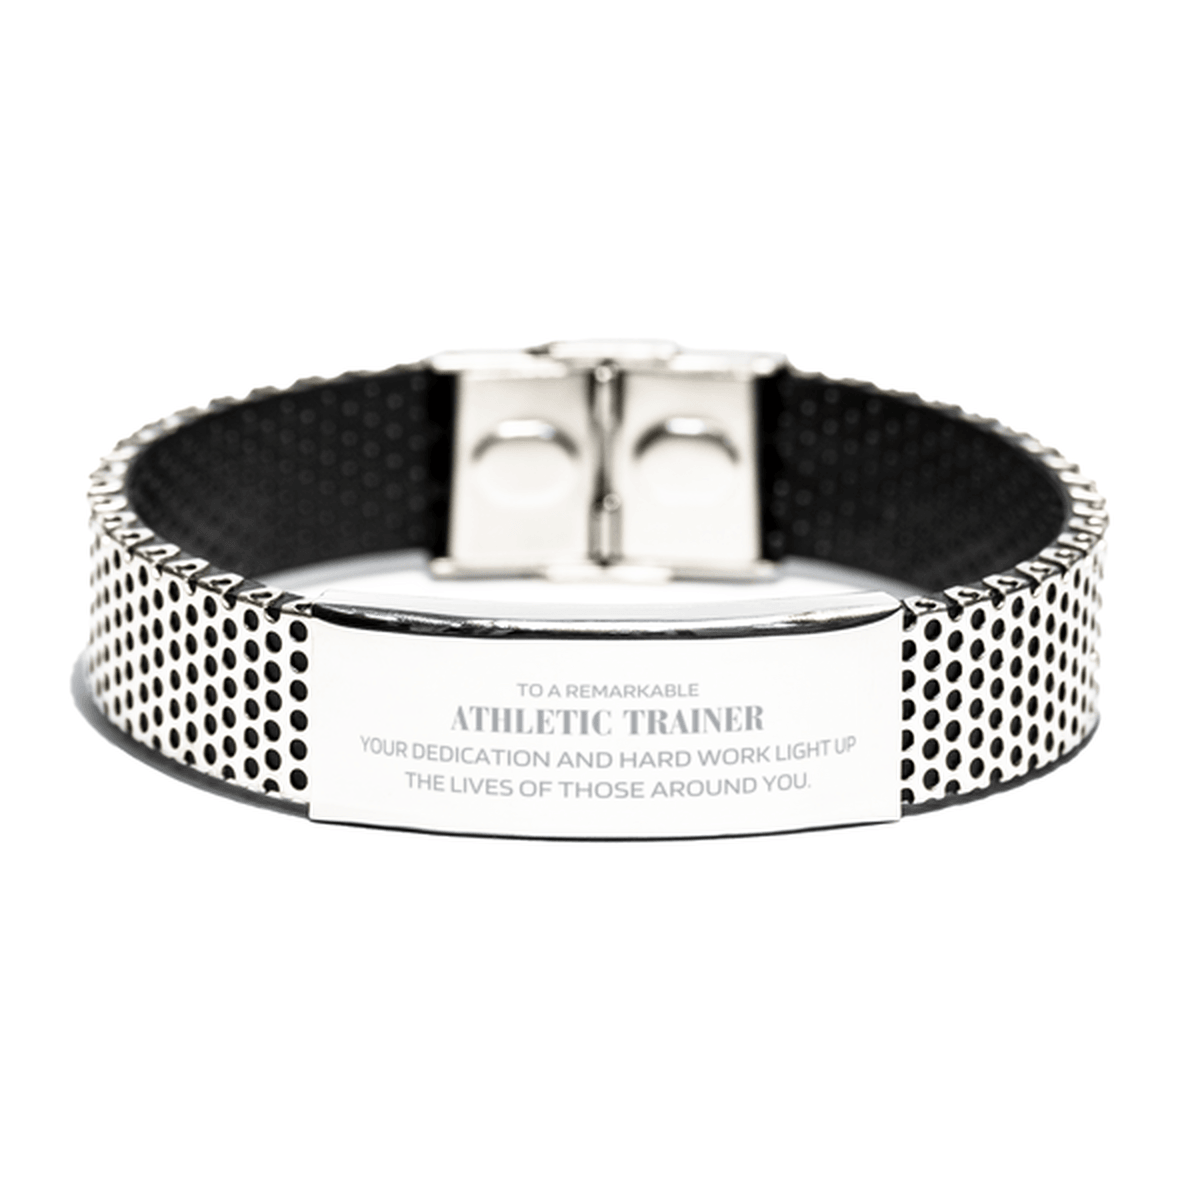 Remarkable Athletic Trainer Gifts, Your dedication and hard work, Inspirational Birthday Christmas Unique Stainless Steel Bracelet For Athletic Trainer, Coworkers, Men, Women, Friends - Mallard Moon Gift Shop